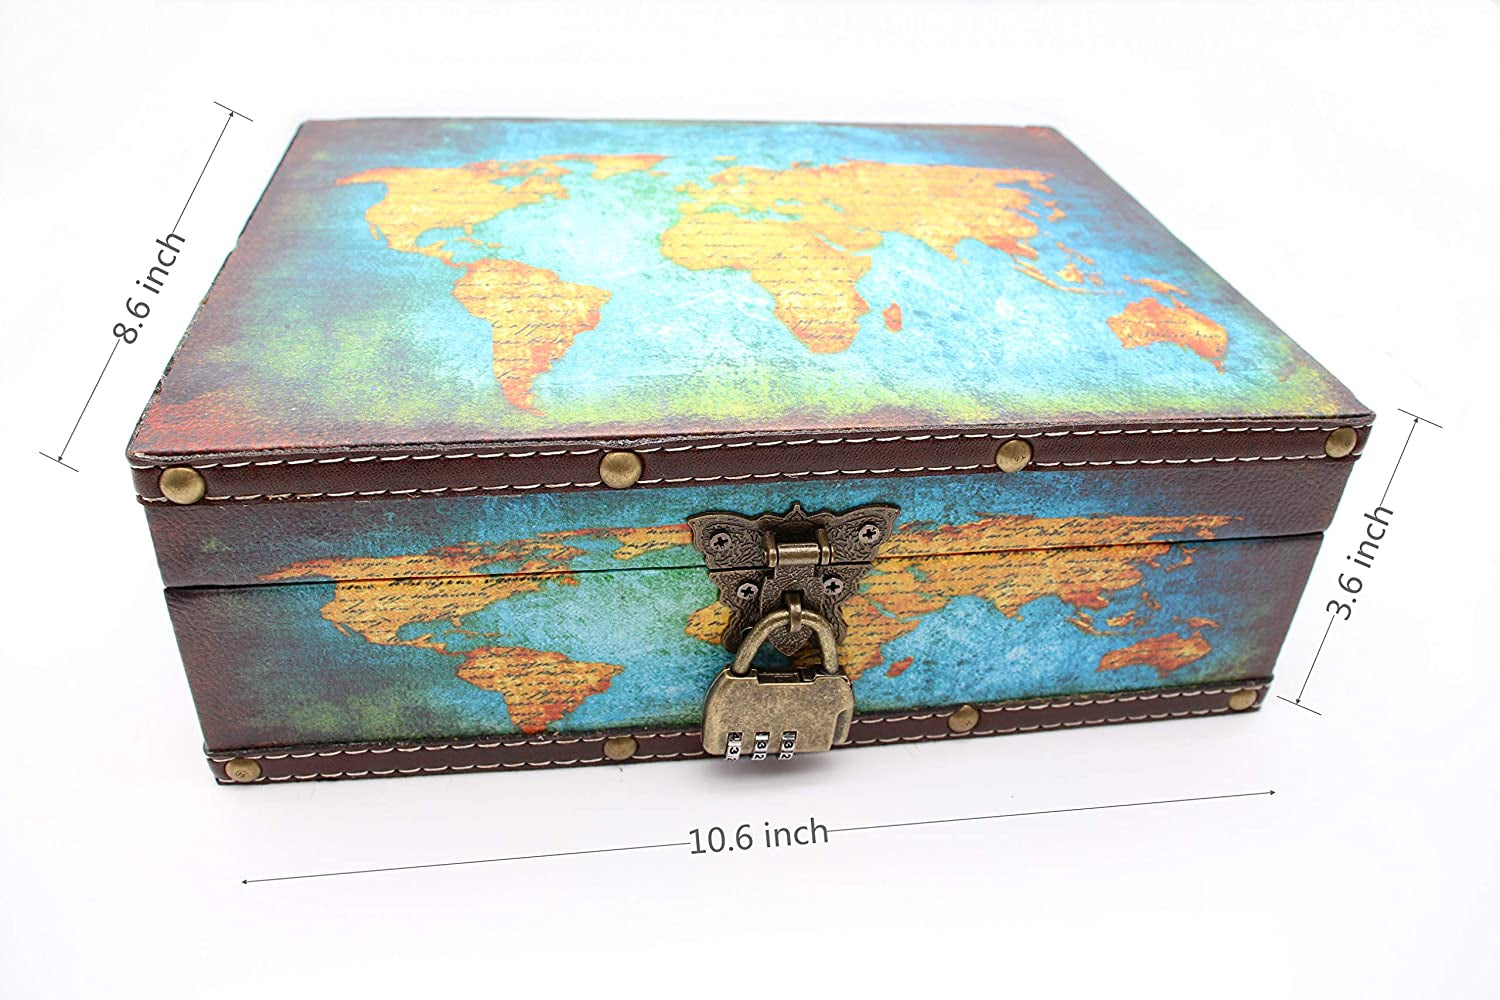 Vintage Wood Treasure Chest Keepsake Jewelry with Map Leather Surface |Treasure Box Kids Pirate Treasure Chest with Lock |Kids Storage Treasure Chest, Also for Teenagers and Adults 10.6"*8.6"*3.6"